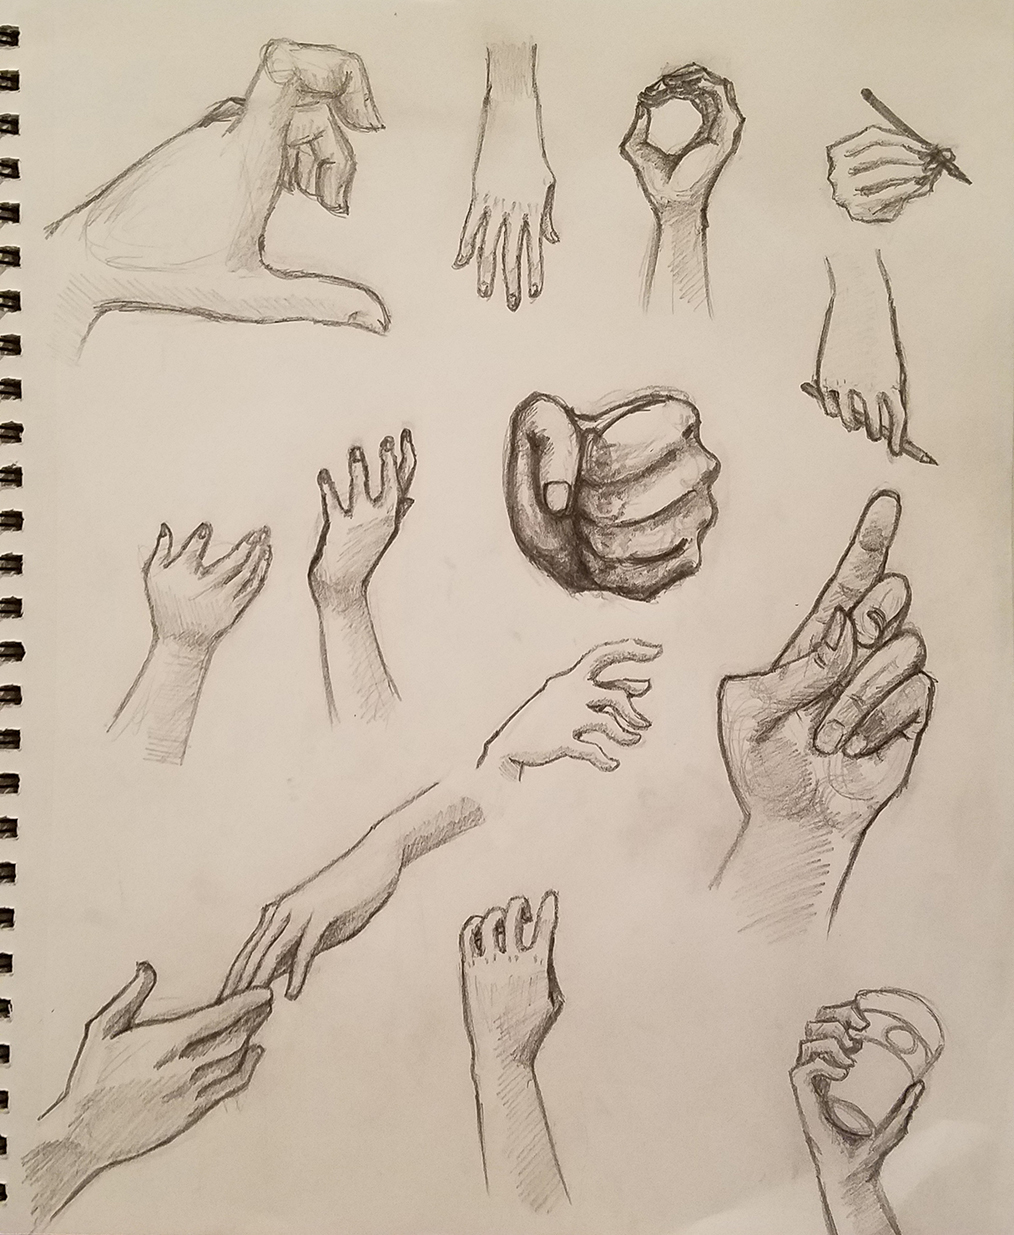 sketch study life hands figure Poses gesture anatomy anatomical